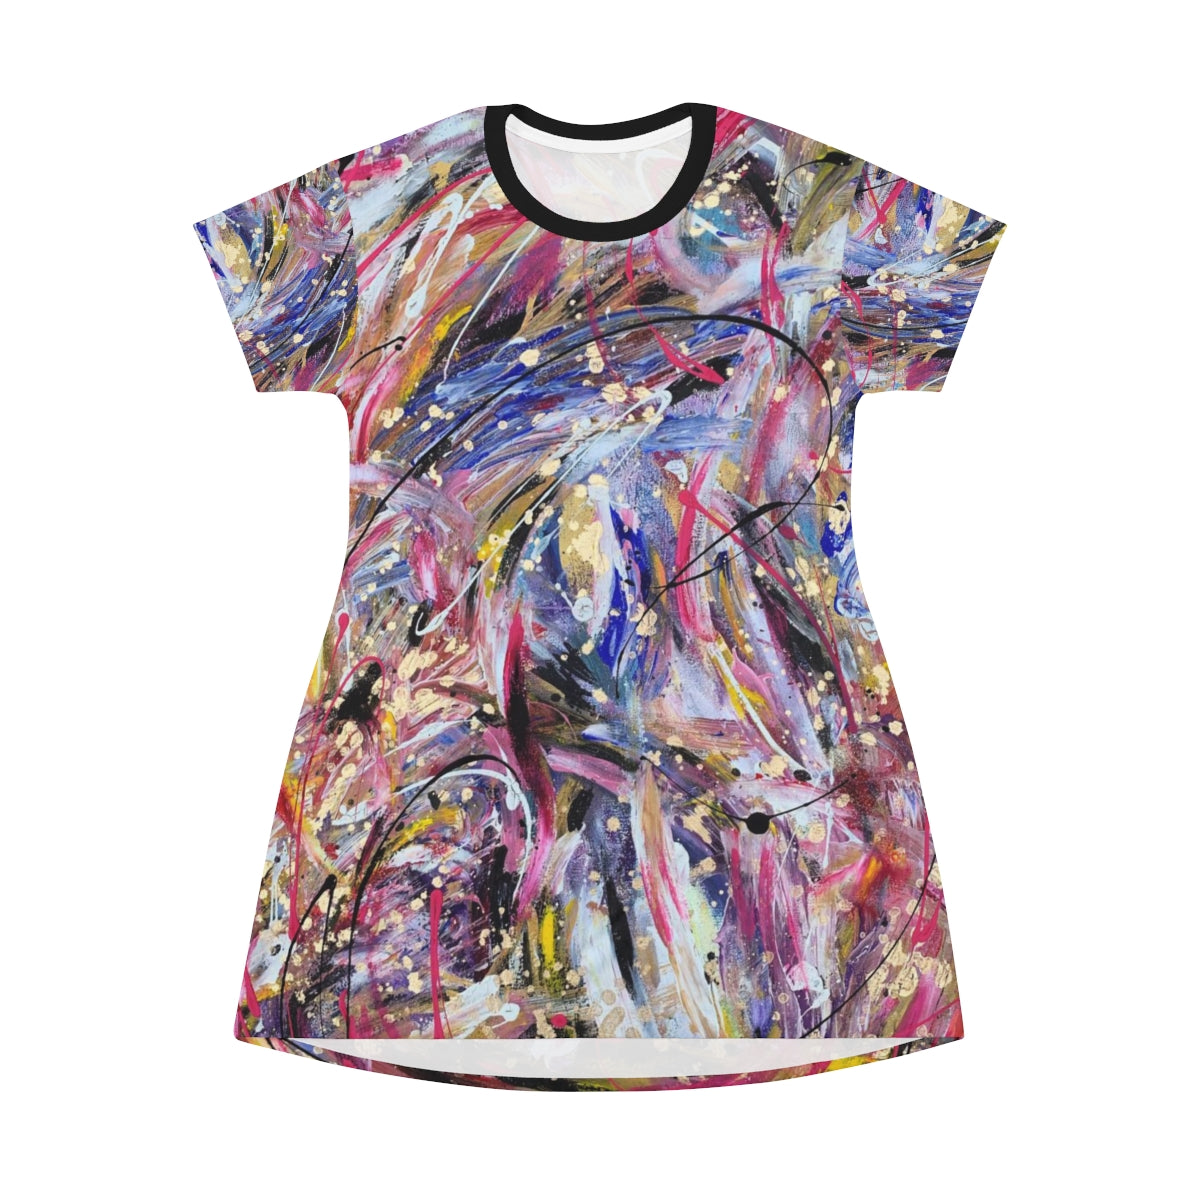 "Maybe Alchemy is a Bubbly Jumble" All Over Print T-Shirt Dress